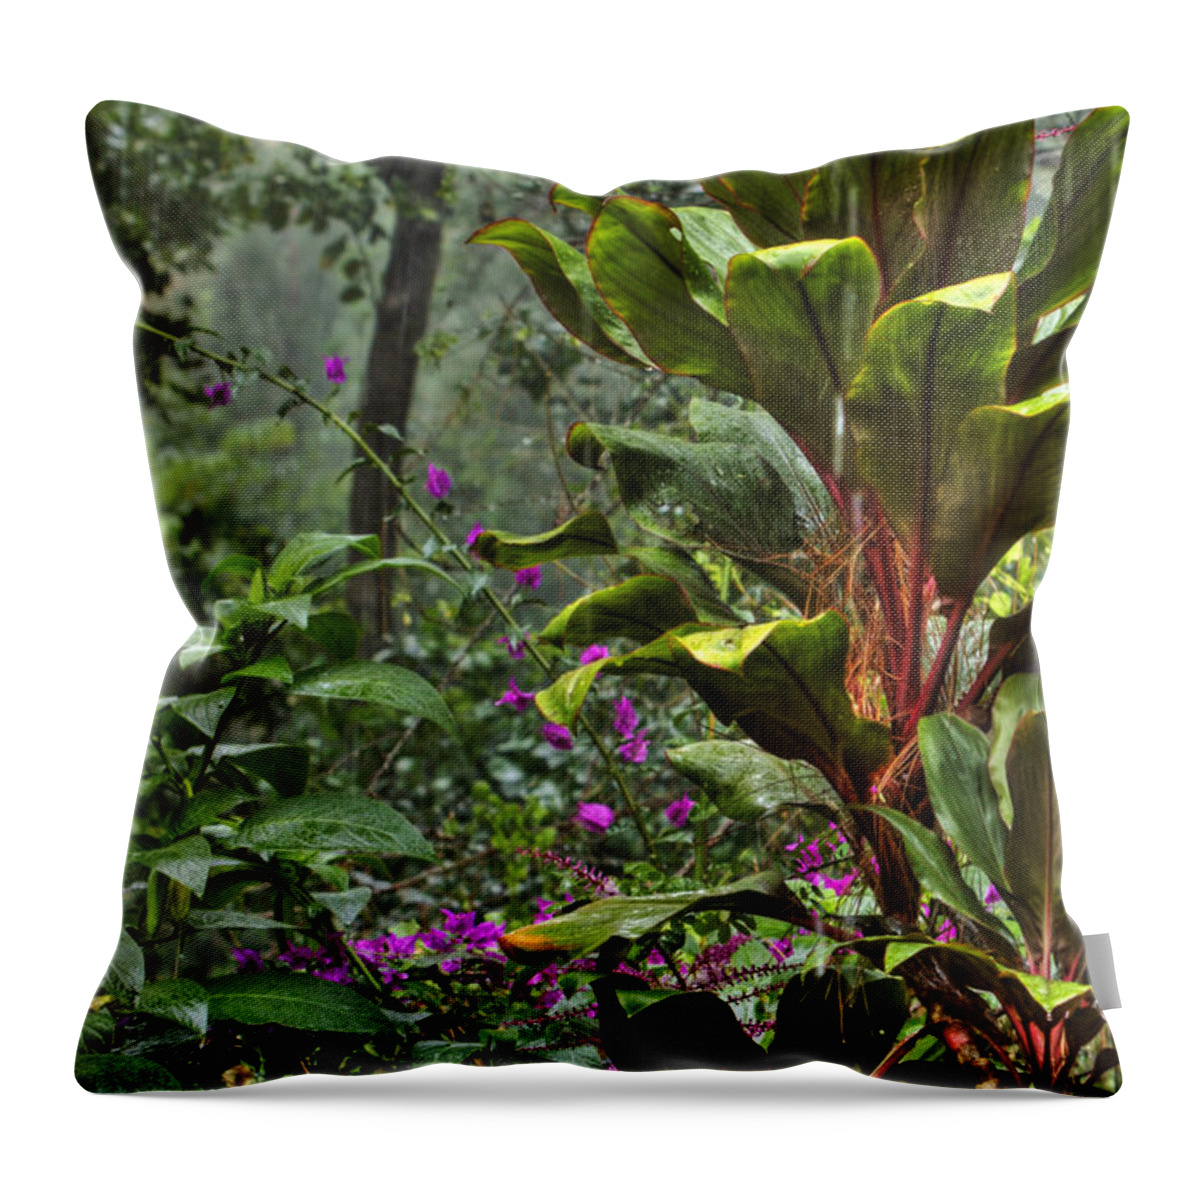 Panama Landscape Art Throw Pillow featuring the photograph Rainforest by Kandy Hurley